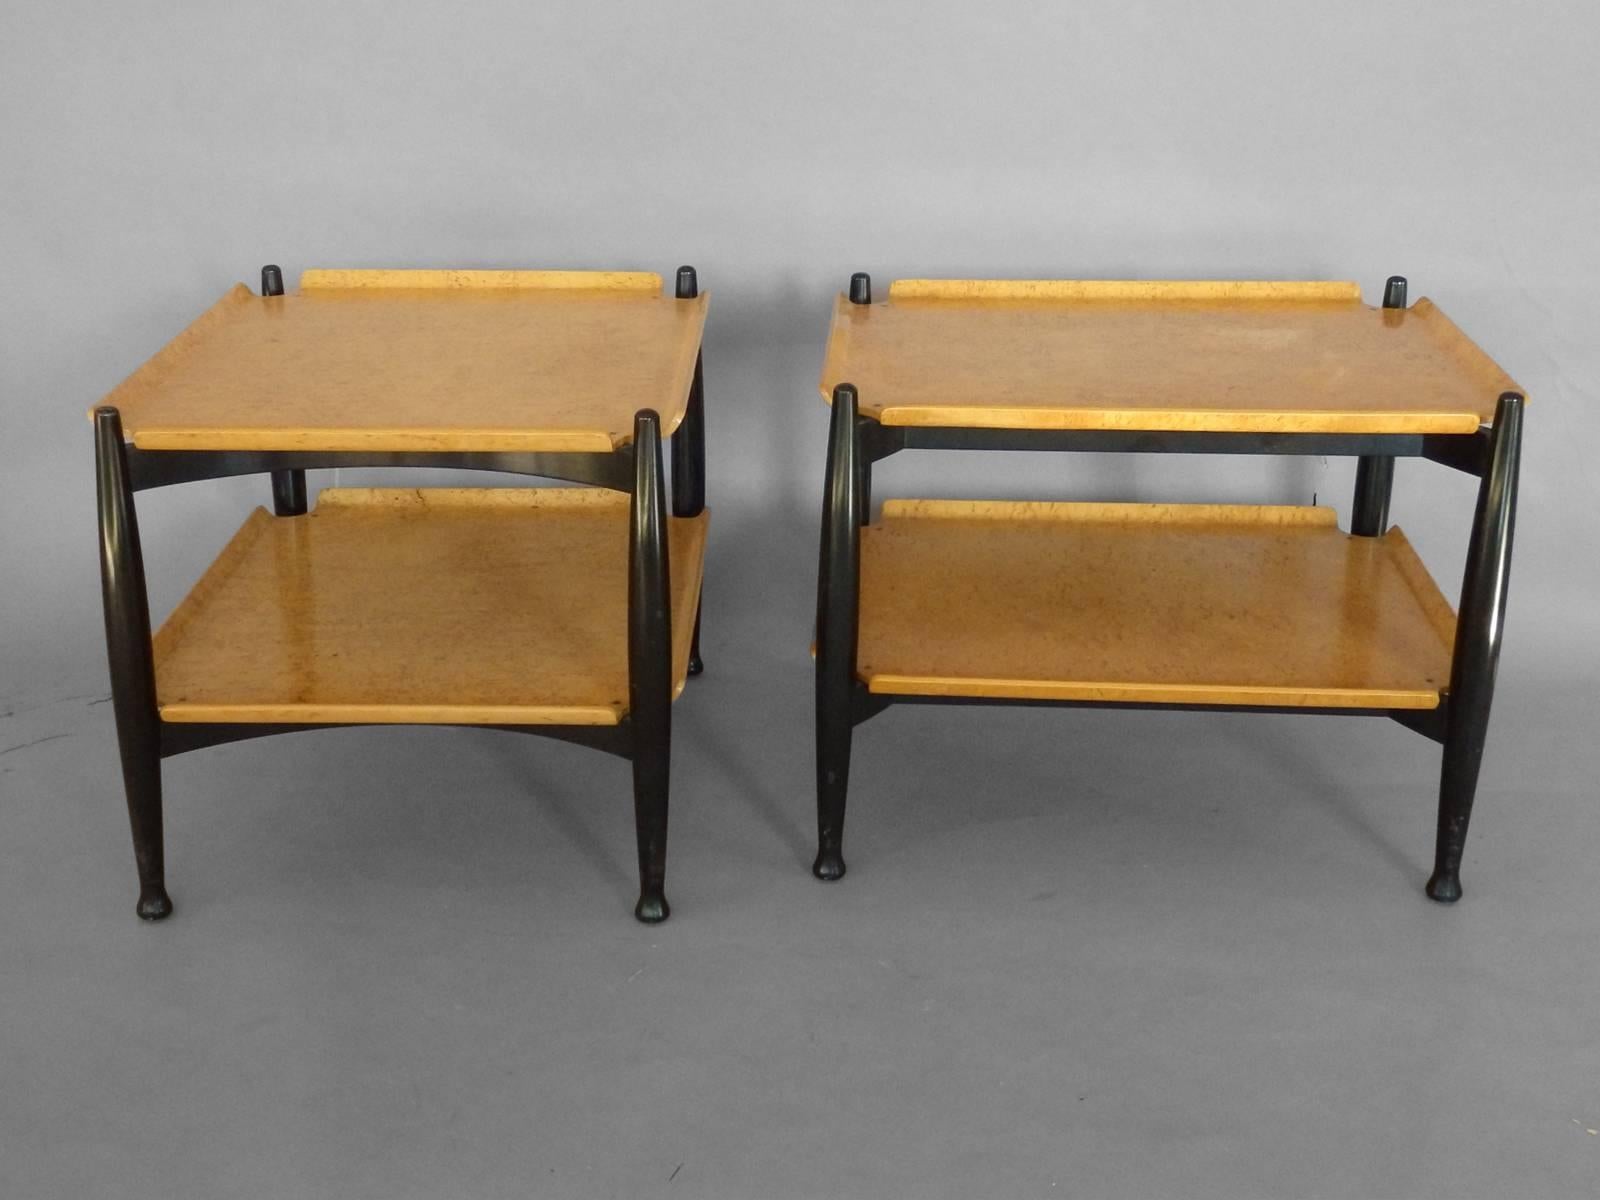 Pair of occasional tables by Edward Wormley, Dunbar for moderns.